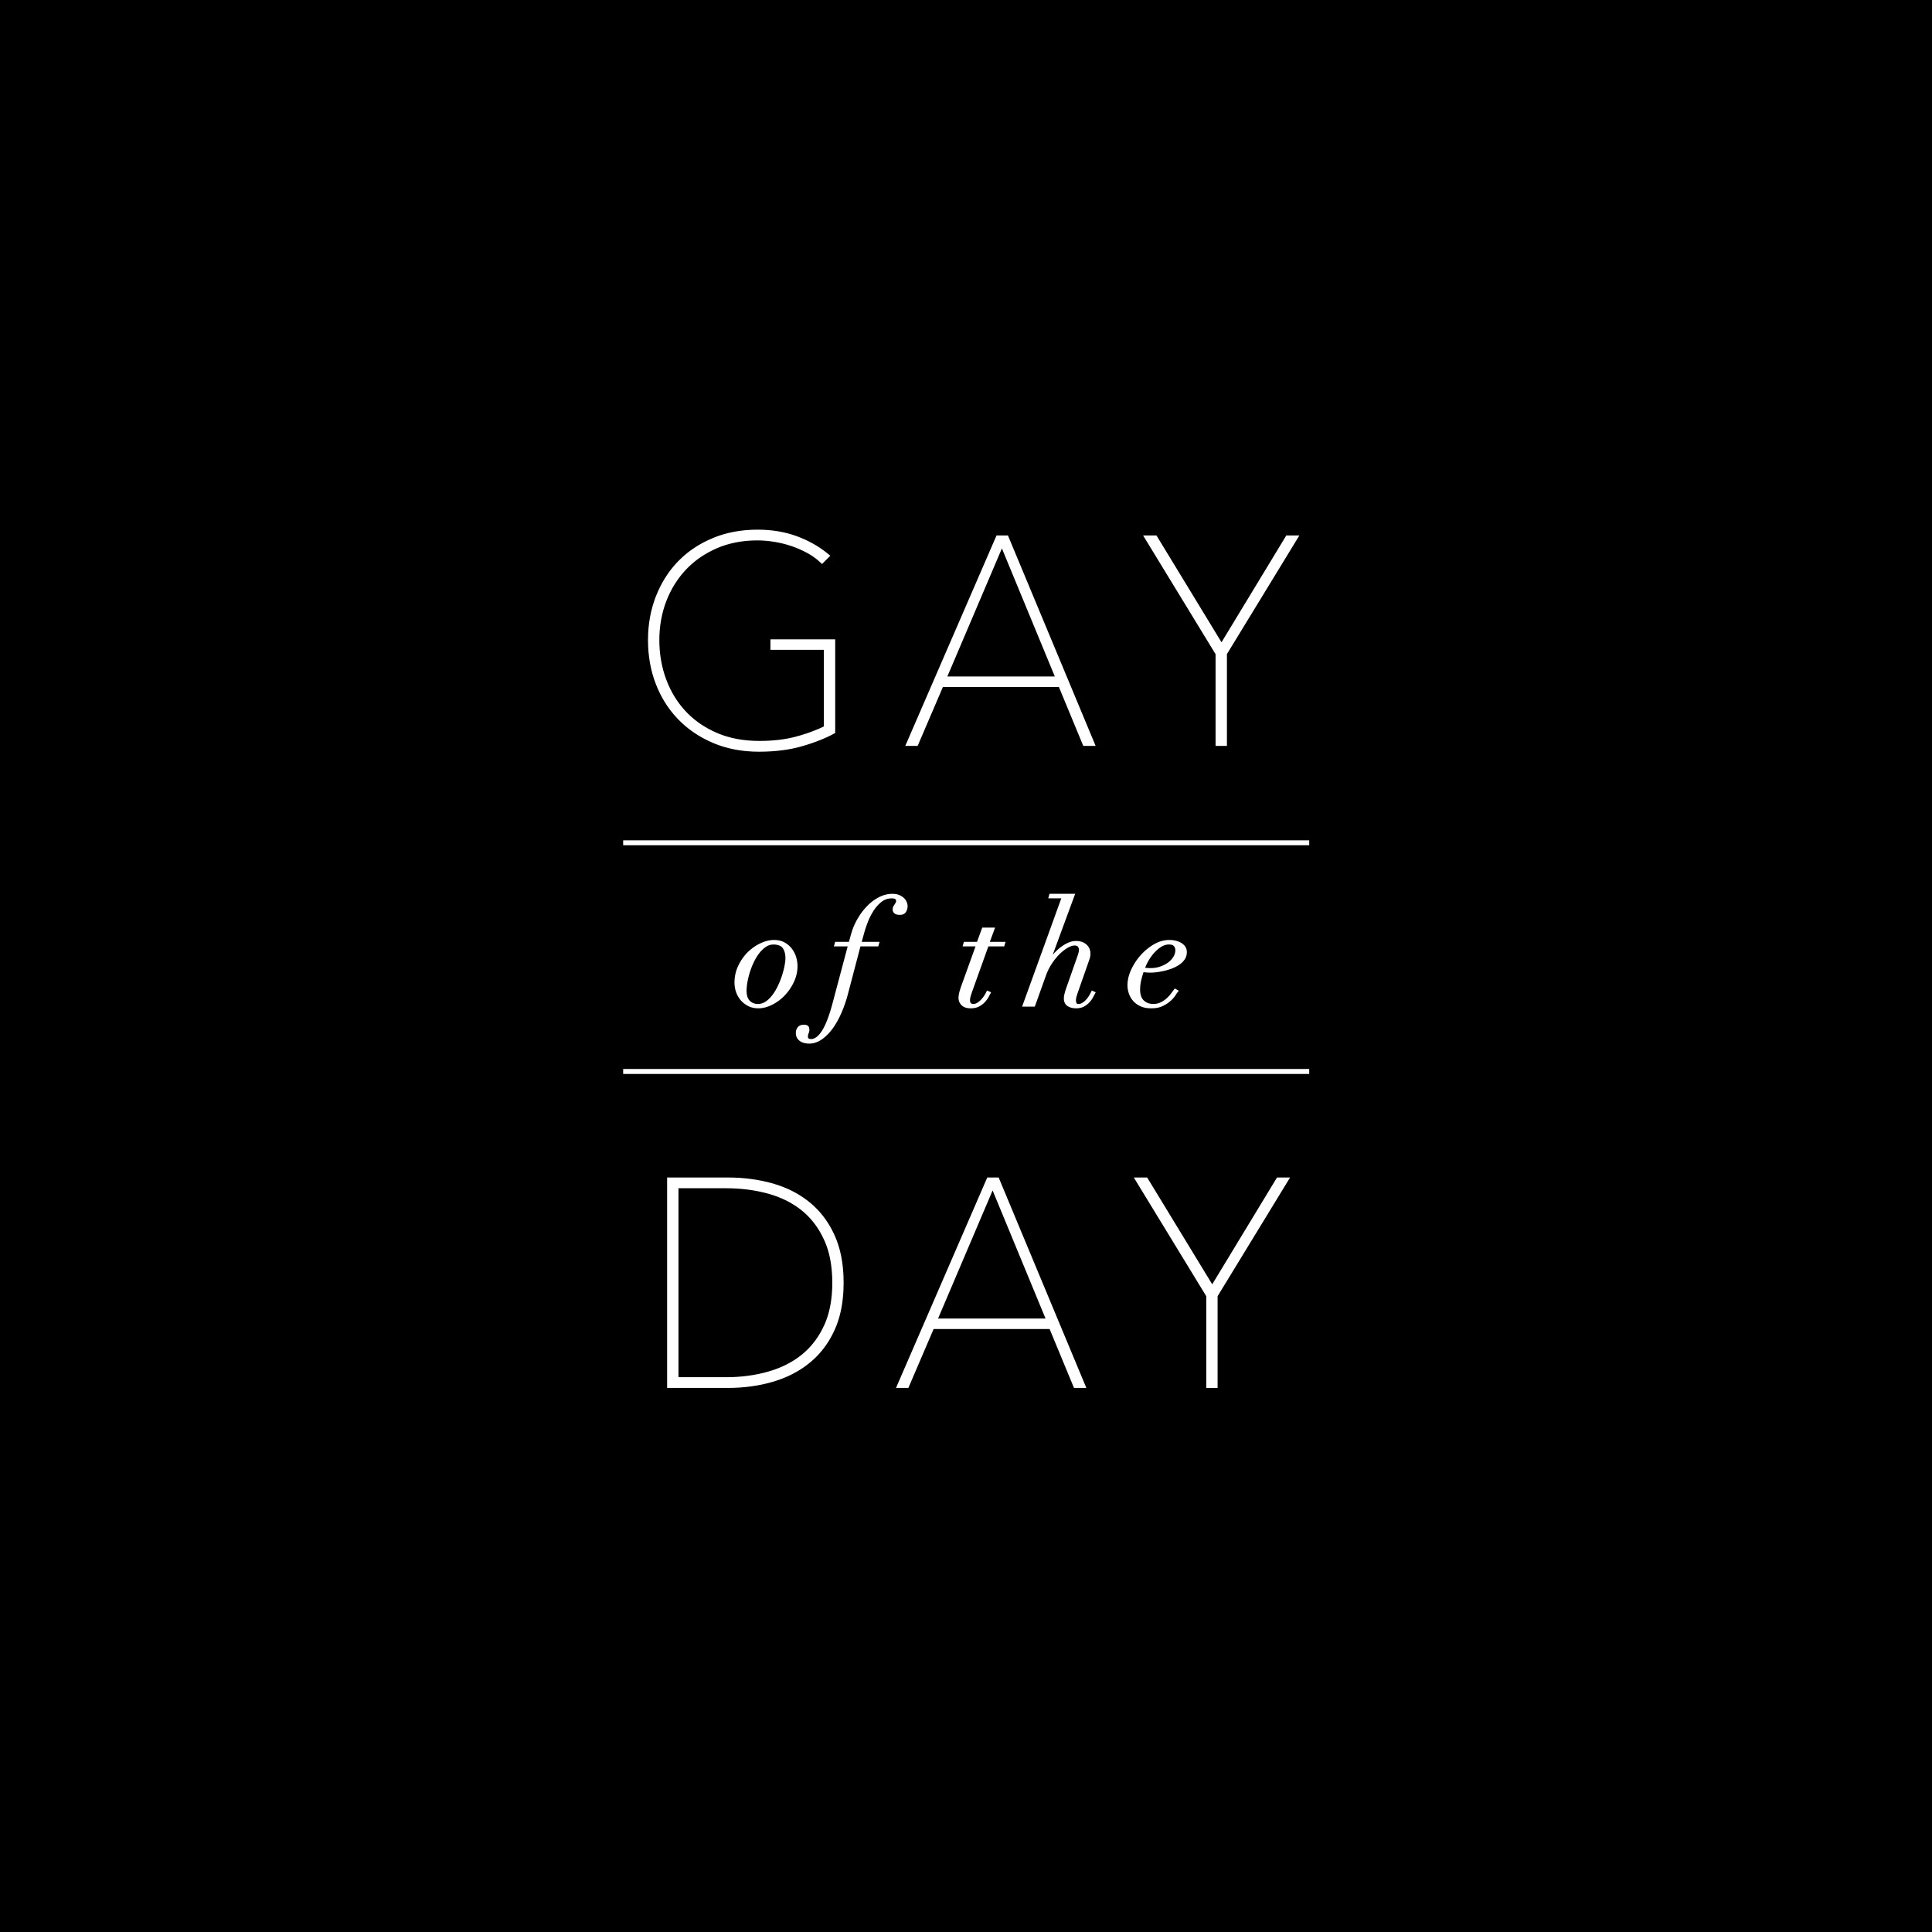 Gay of the Day. Profiling notable LGBT people from history.